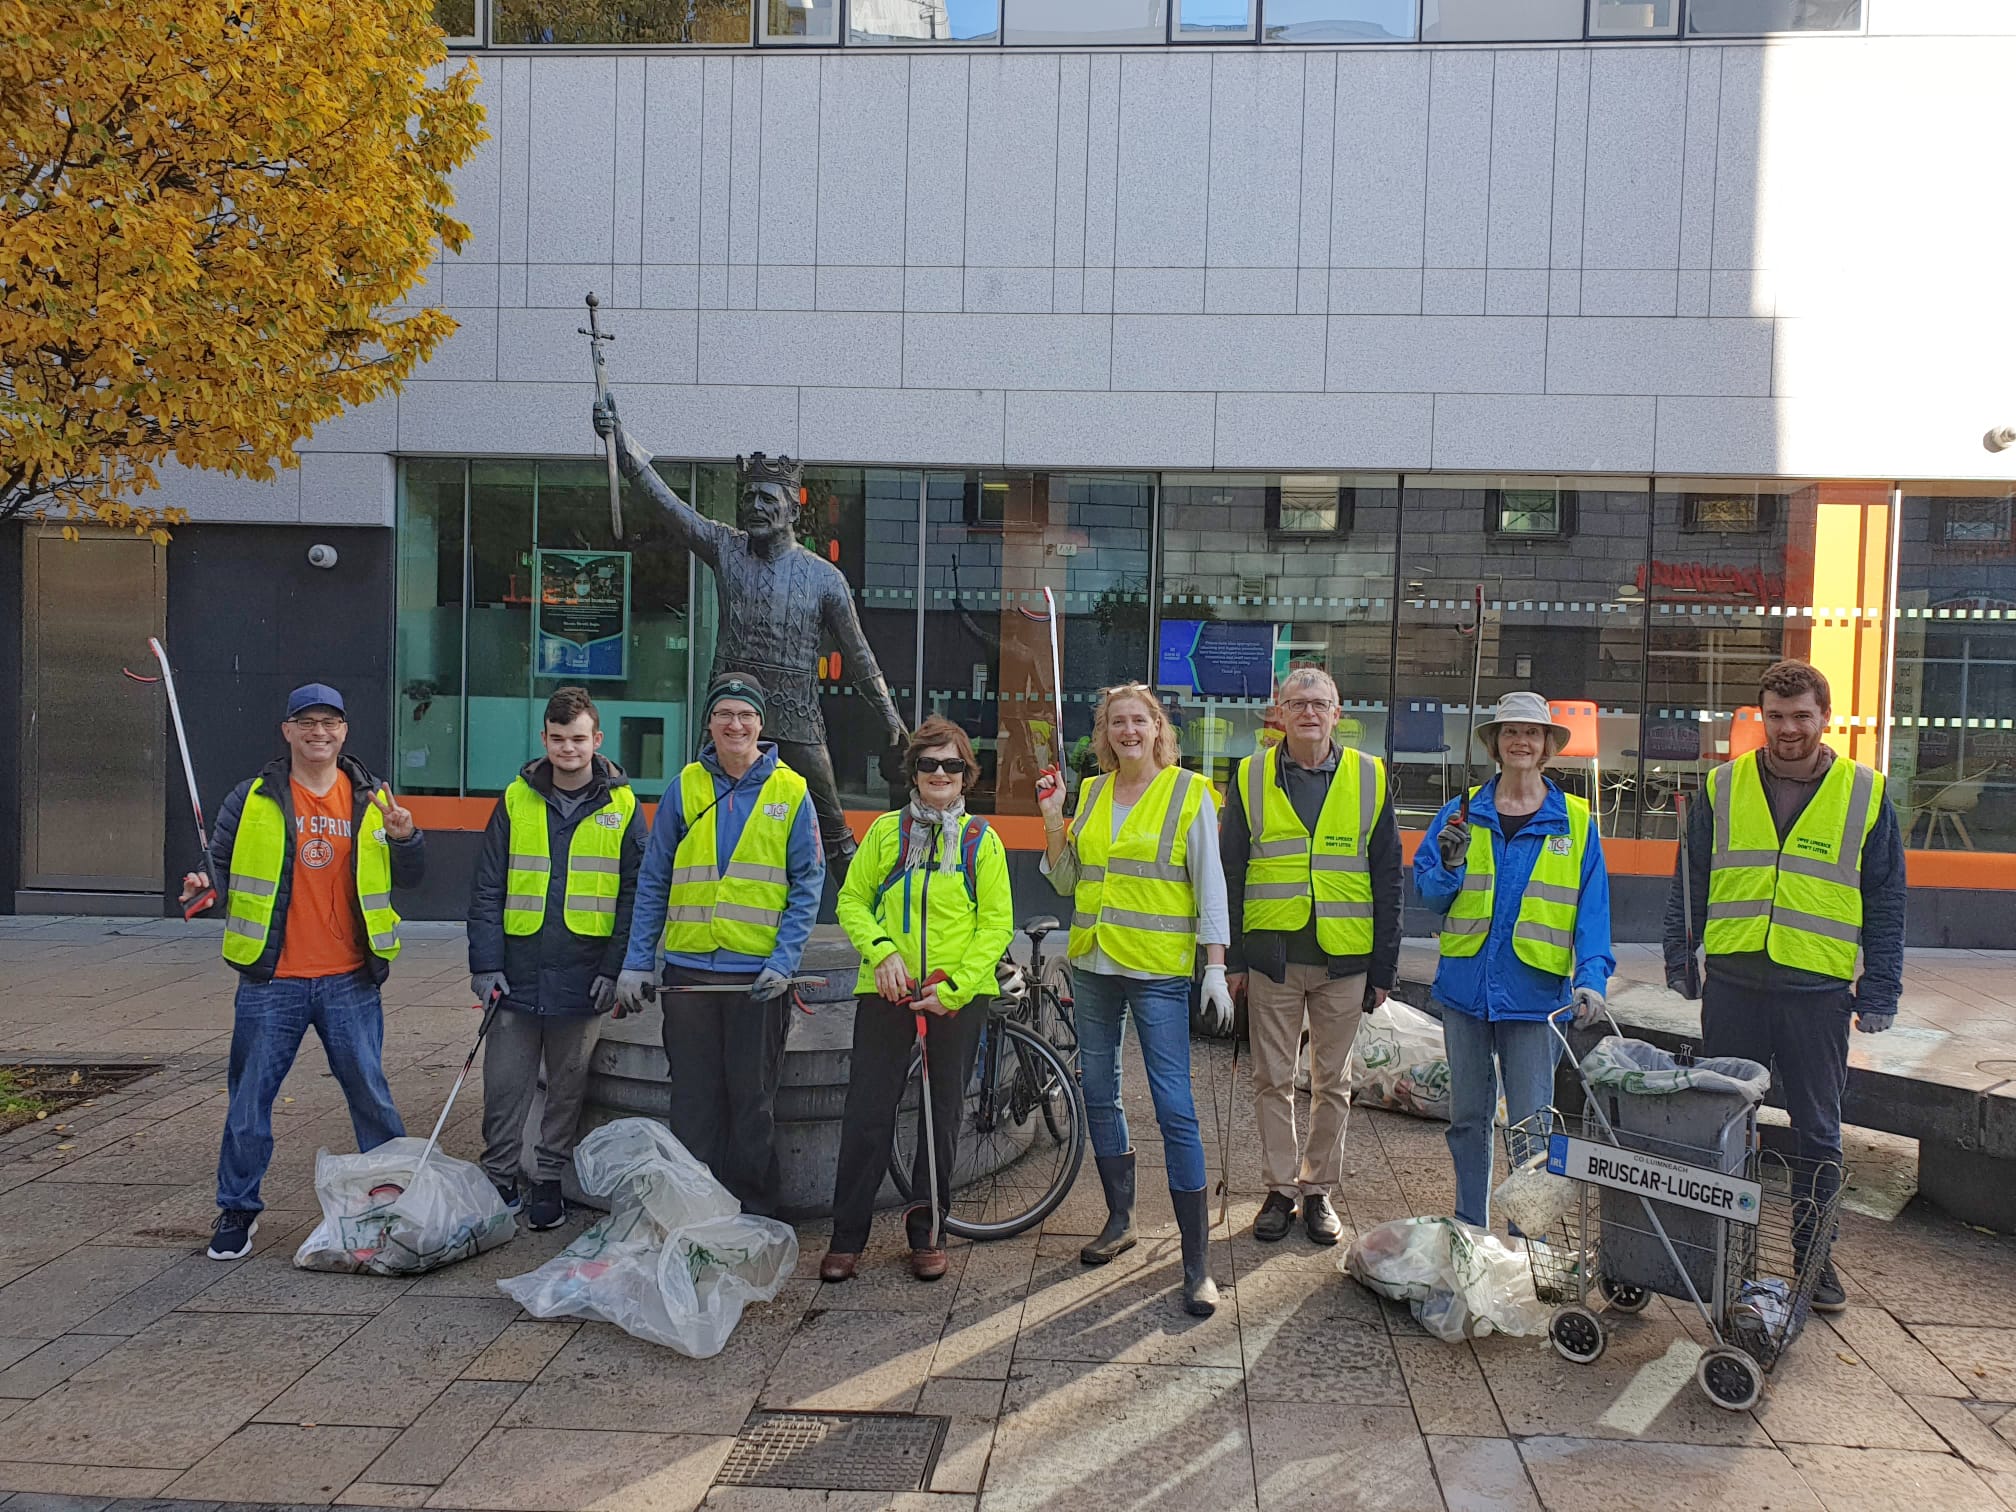 Tidy Towns Competition 2021 - The Tidy Towns volunteers in Limerick picked up their fourth bronze medal this year